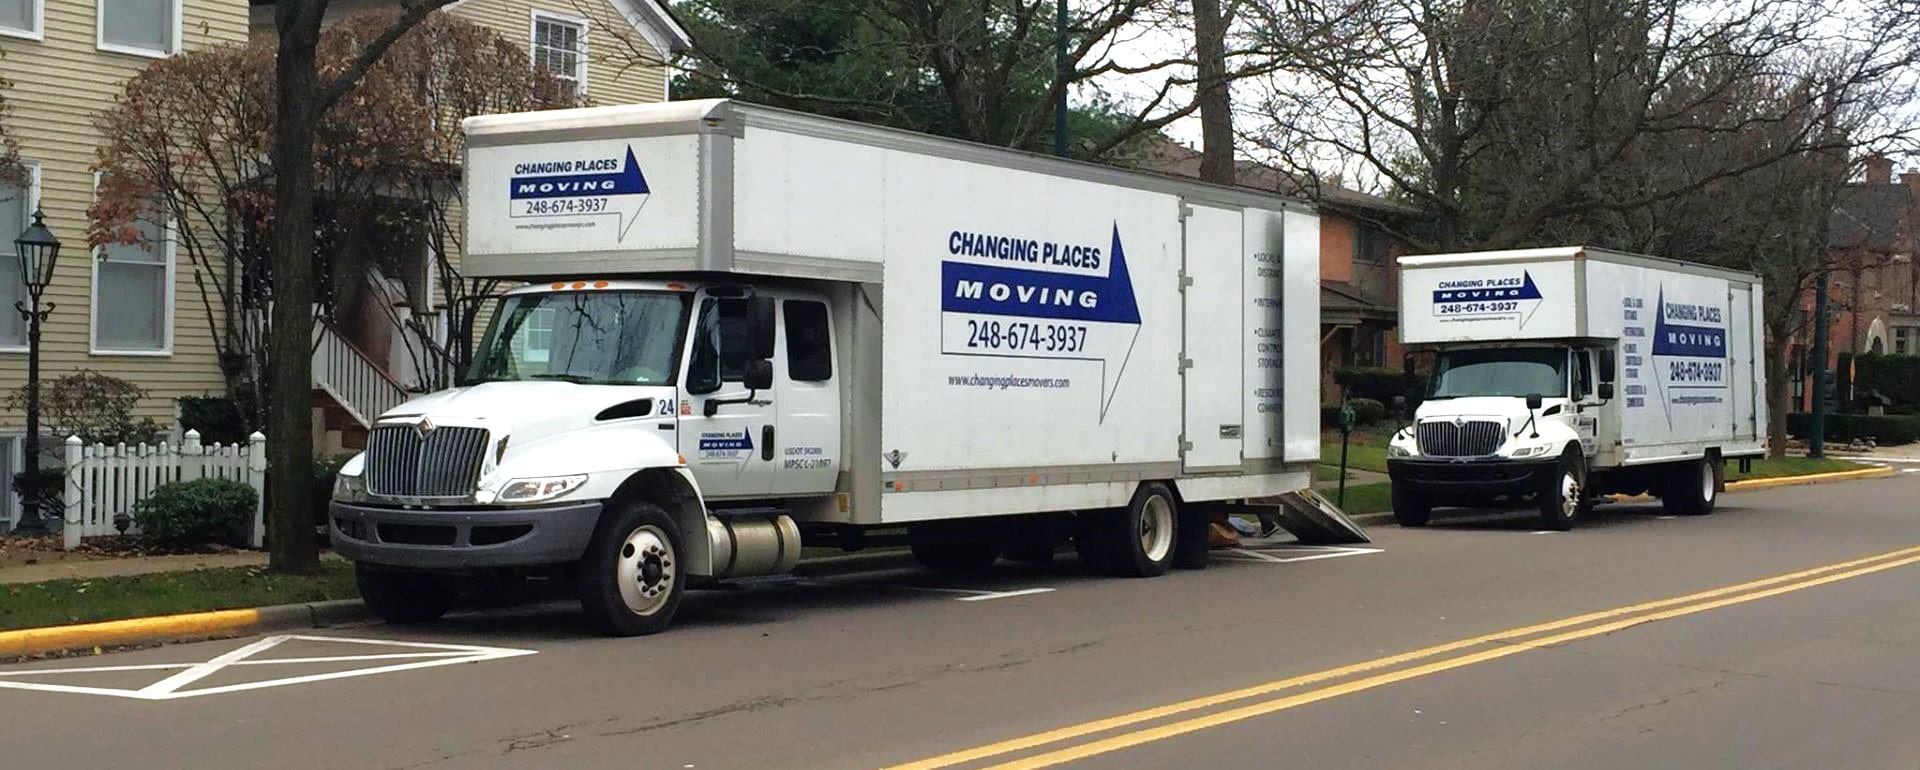 A truck that does residential moving in Birmingham, MI